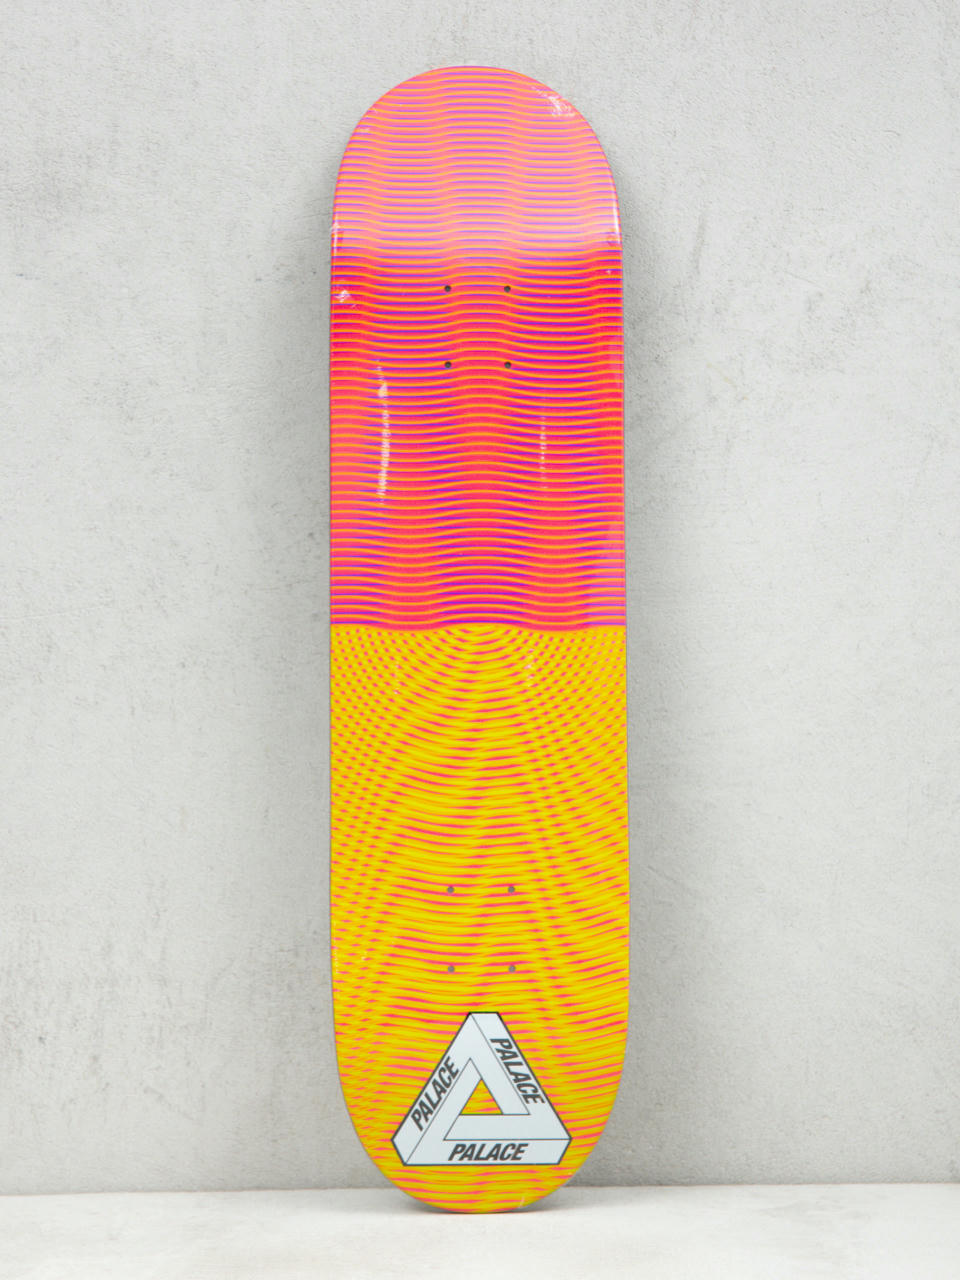 Palace Skateboards Trippy Deck (neon pink/yellow)